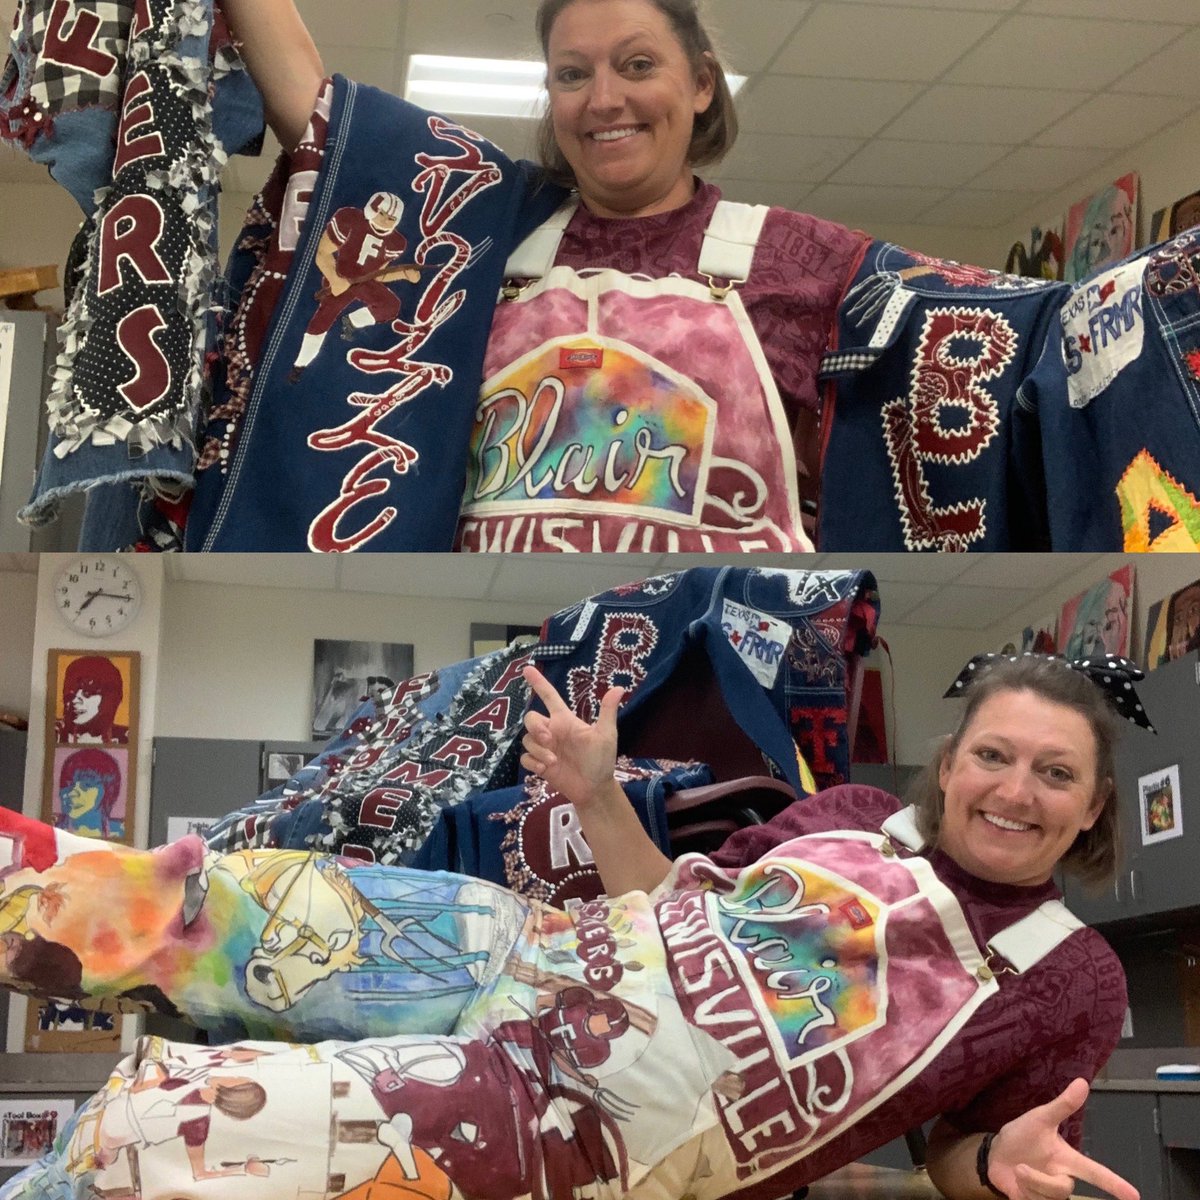 16years of Fighting Farmer overalls! #lhsspiritdays @LewisvilleHS @lewisvillestuco I want that spirit cone! @drlancasterdc @BarrientoscaLHS How ‘bout you?